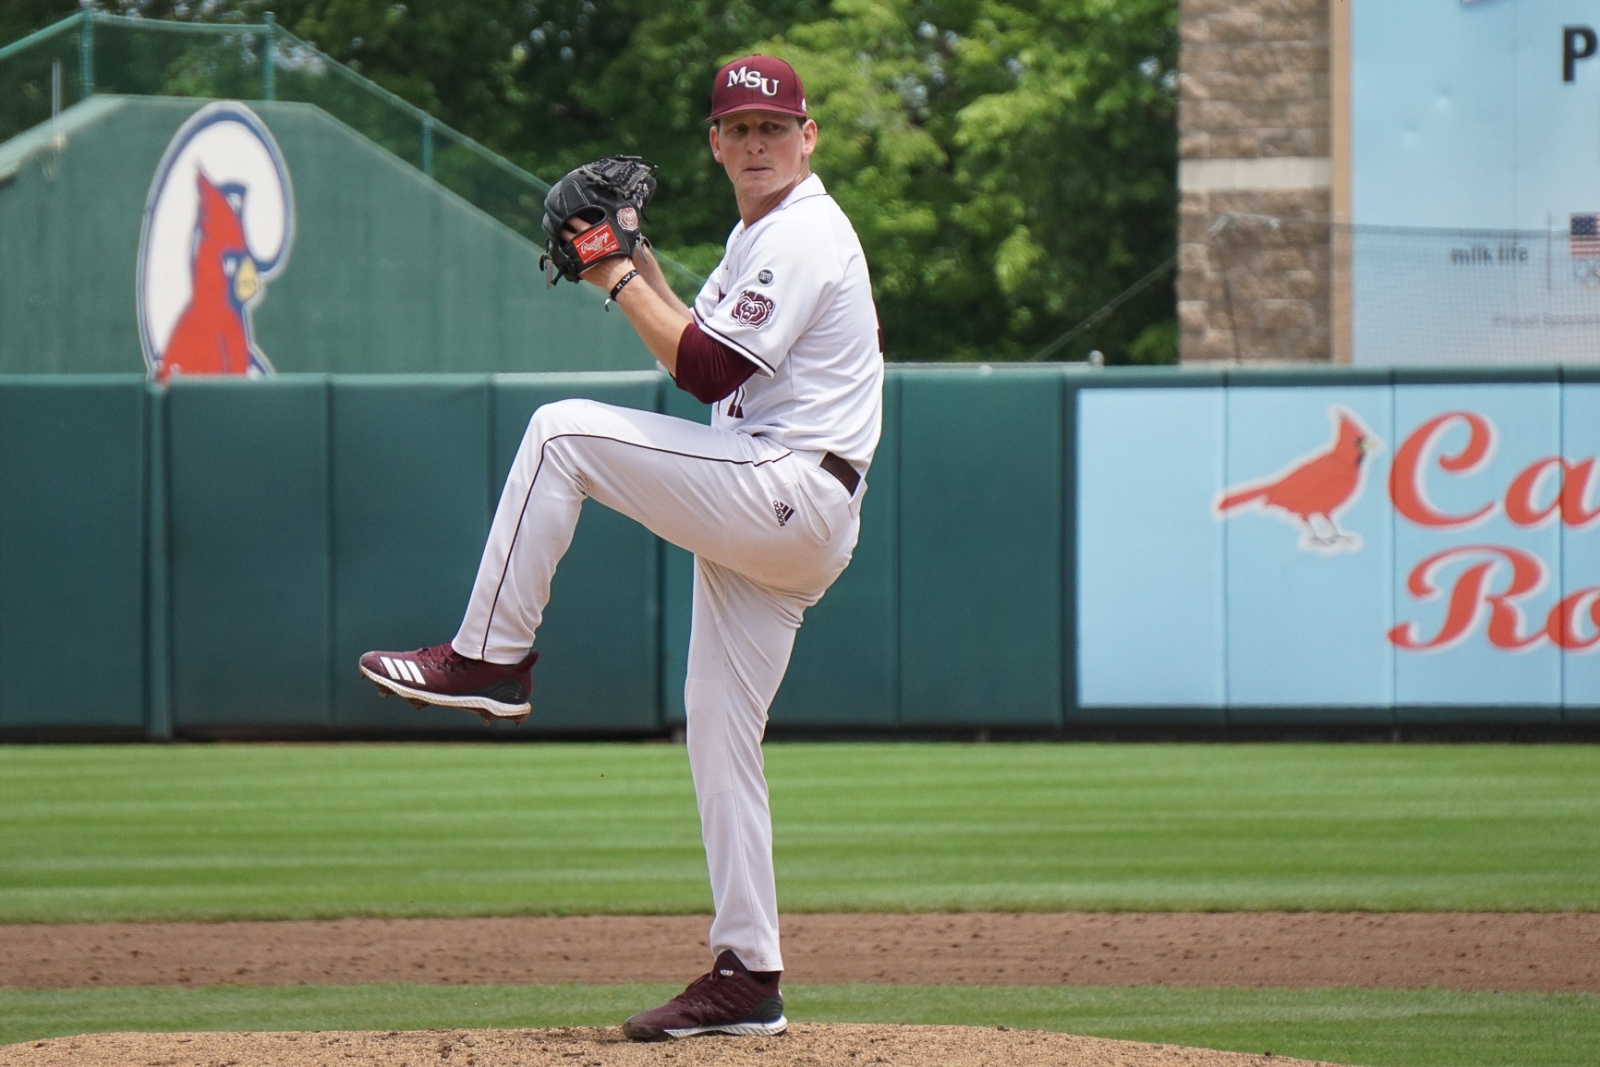 Hayden Juenger, wearing a Missouri State baseball uniform, pitches during a game at Hammons Field